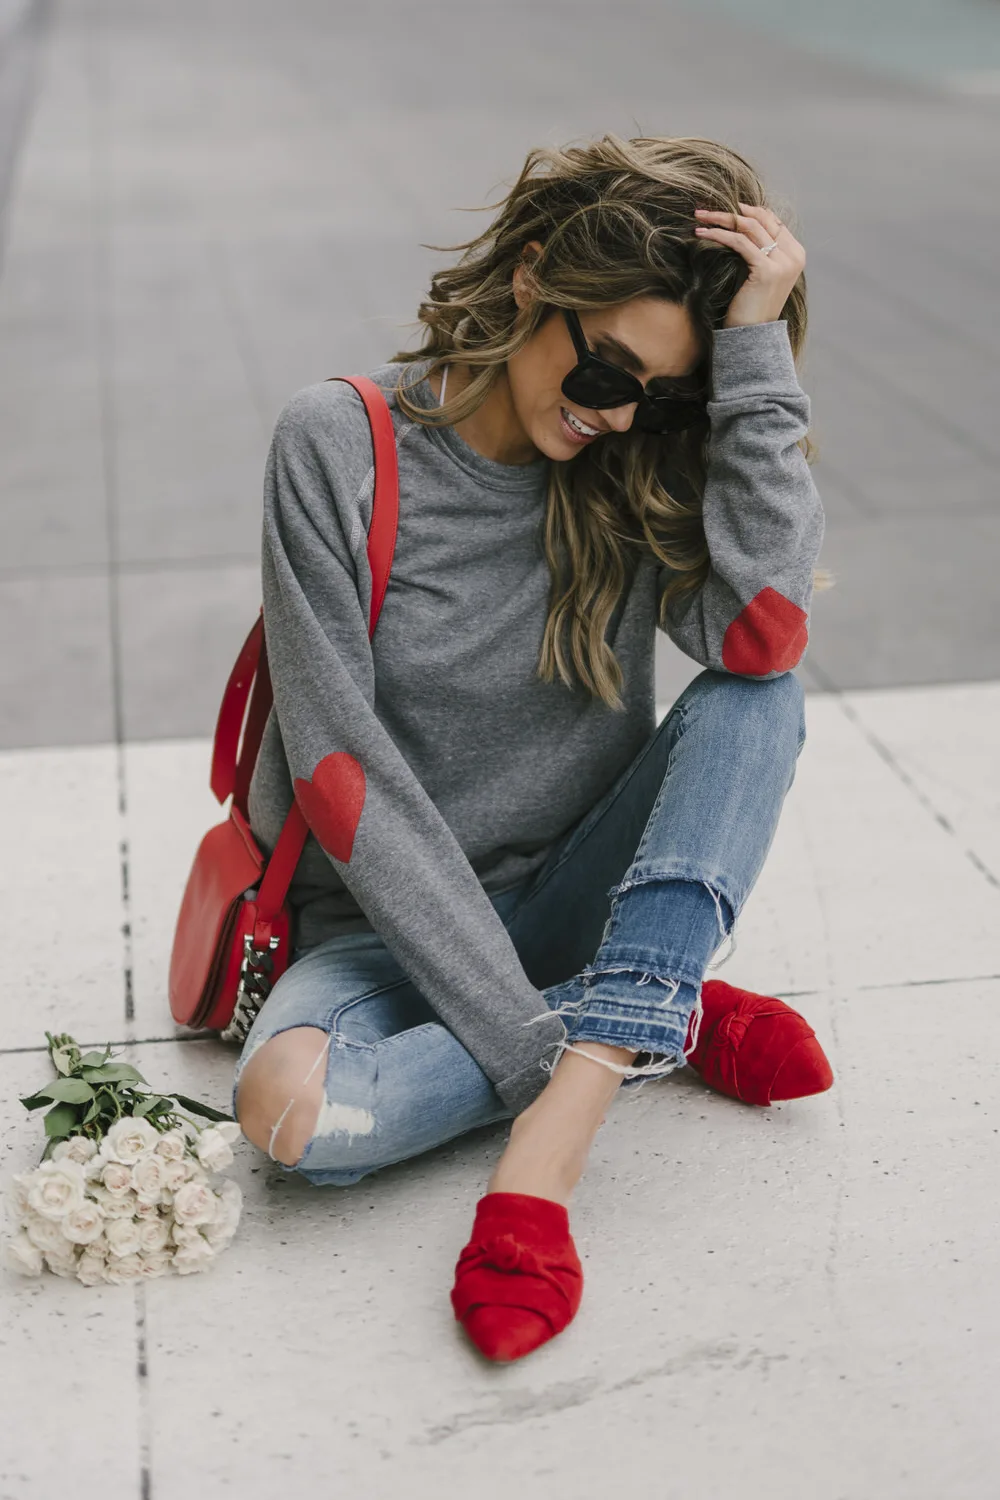 Red shoes and grey t-shirt